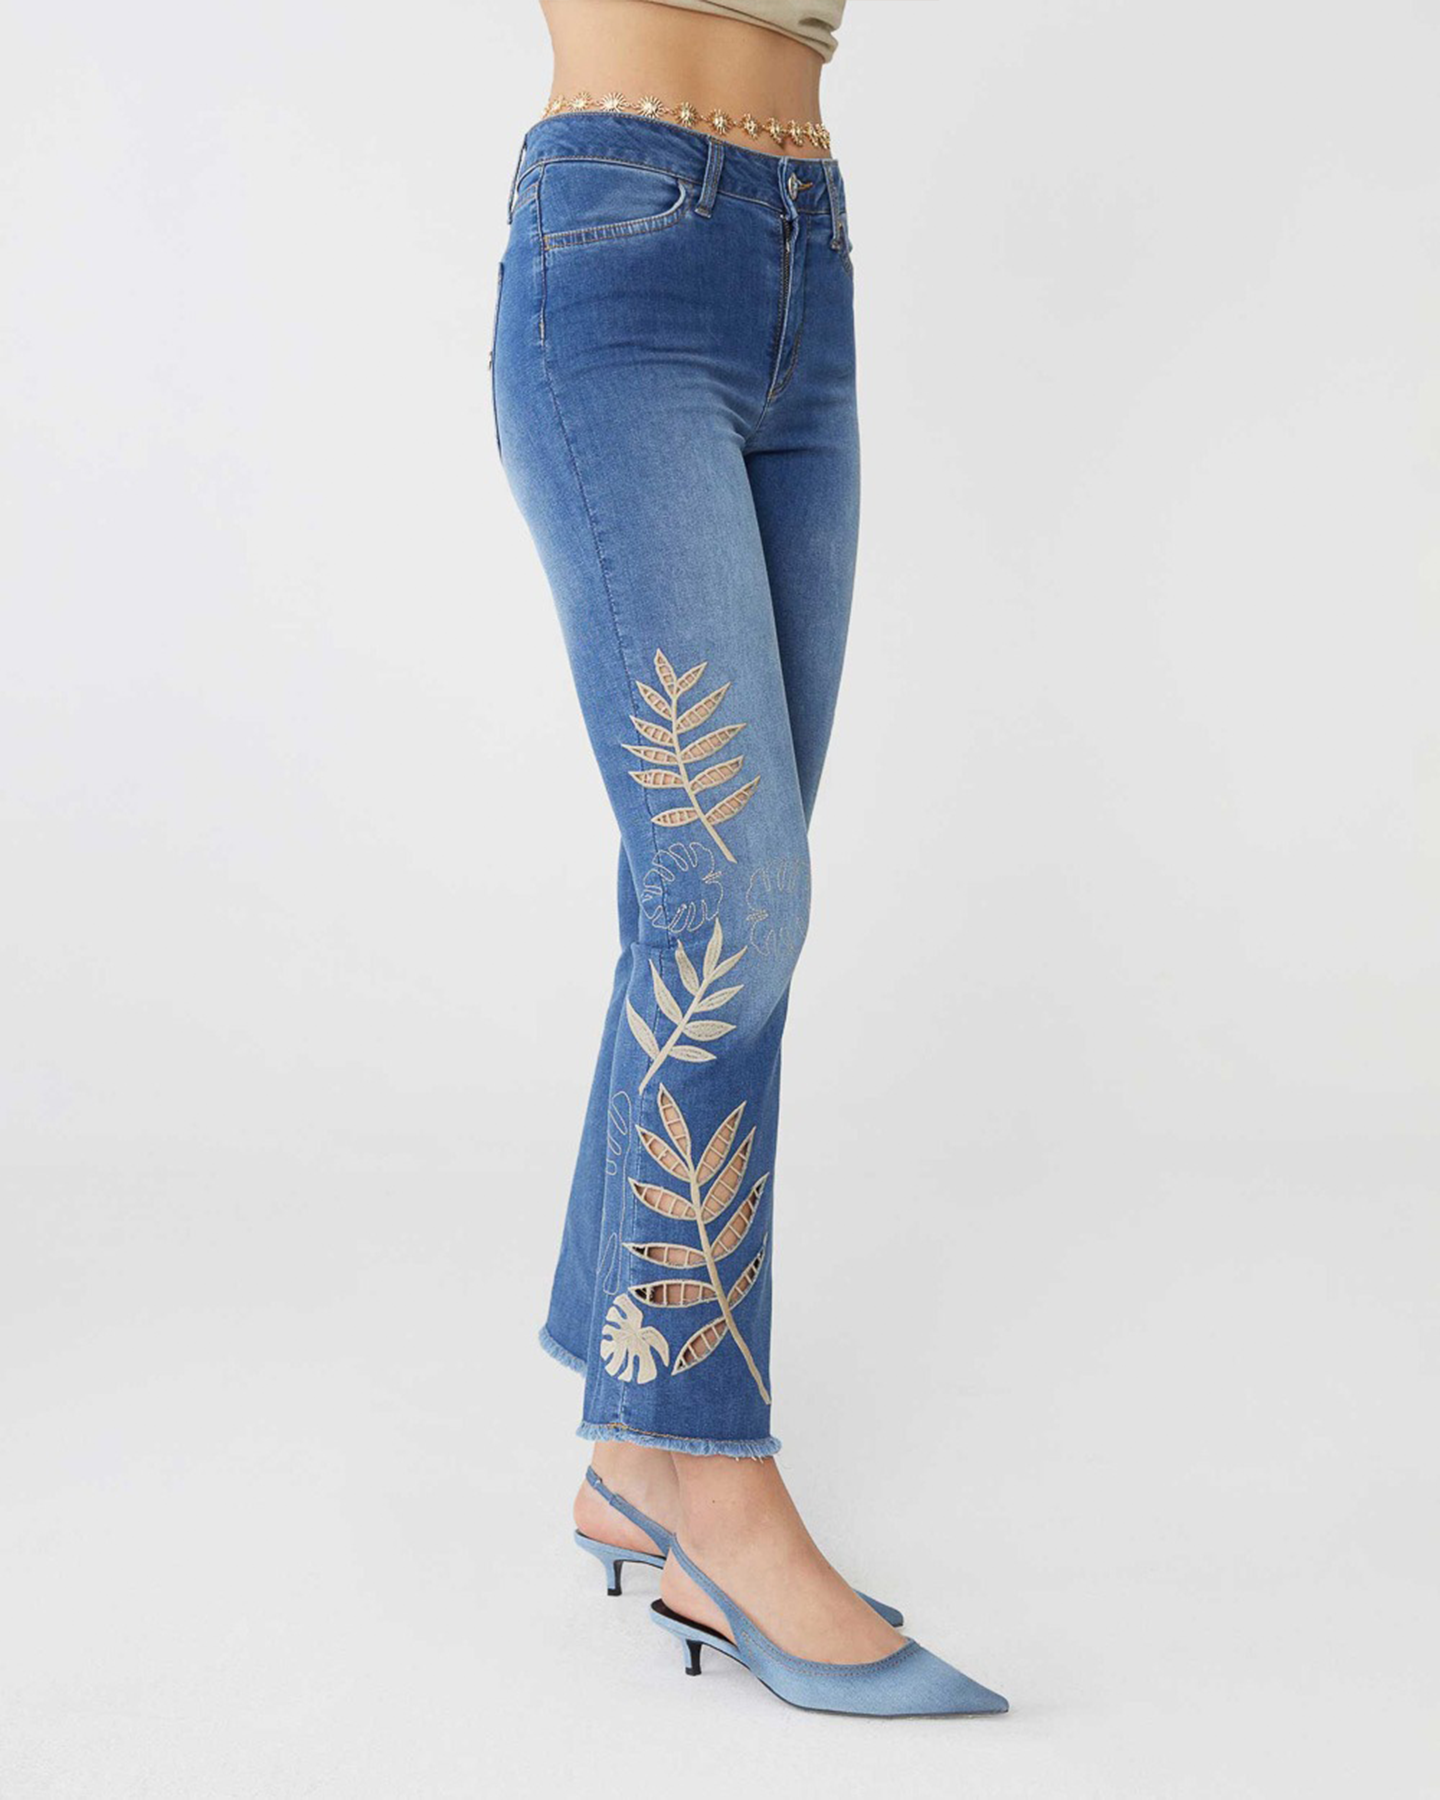 SISSY SUMMER EMBROIDERED SILKY STRETCH JEAN